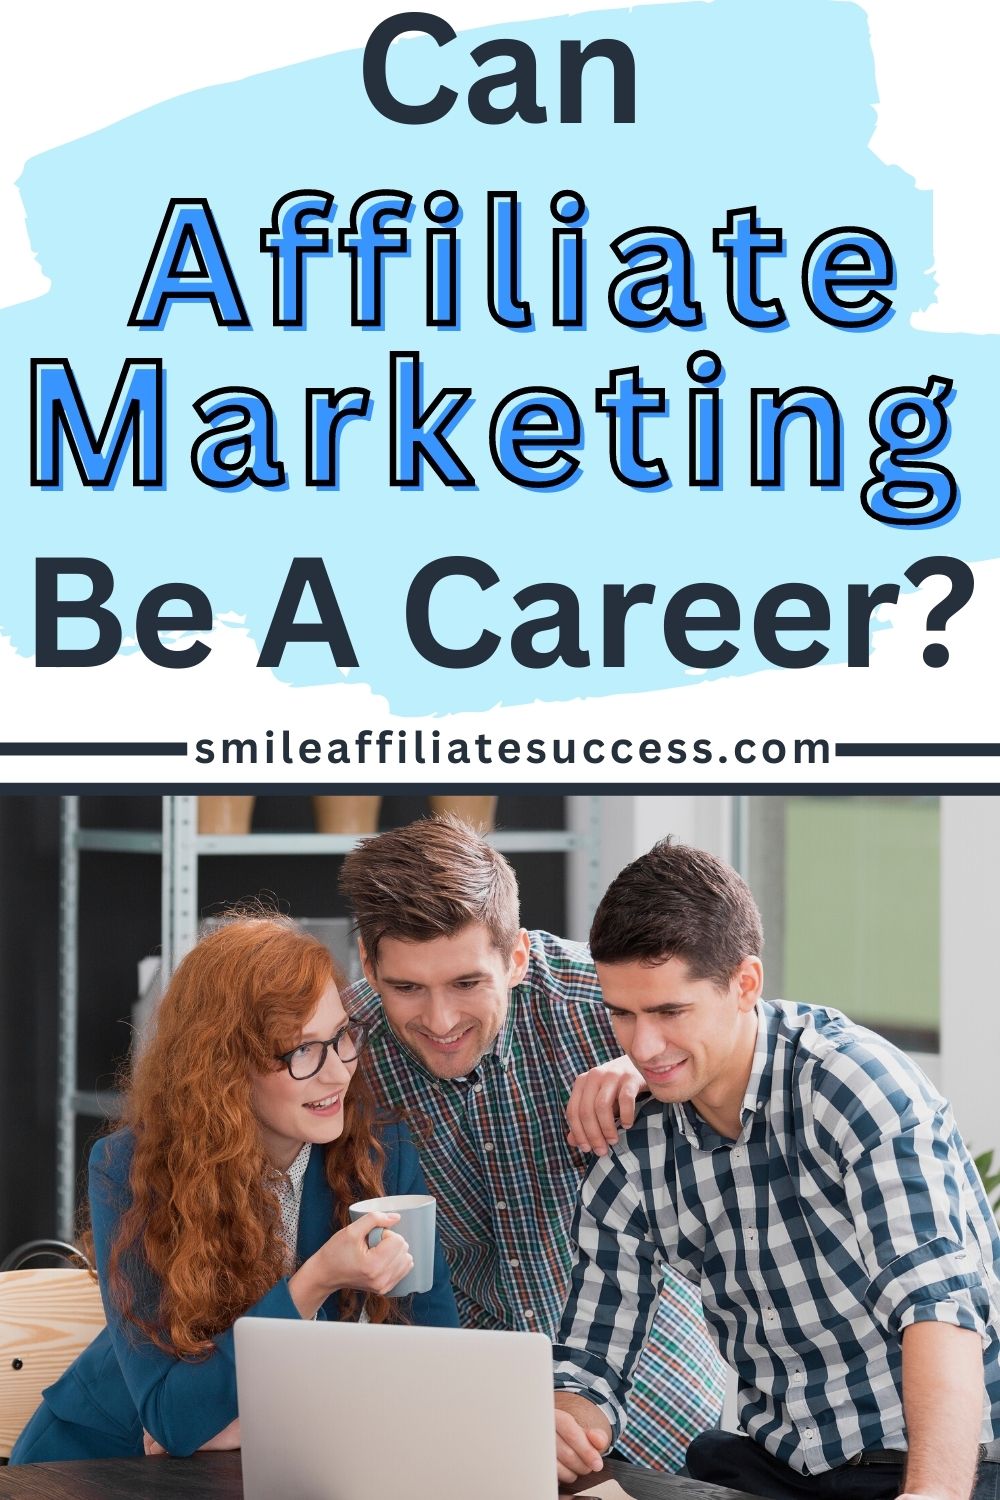 Can Affiliate Marketing Be A Career?